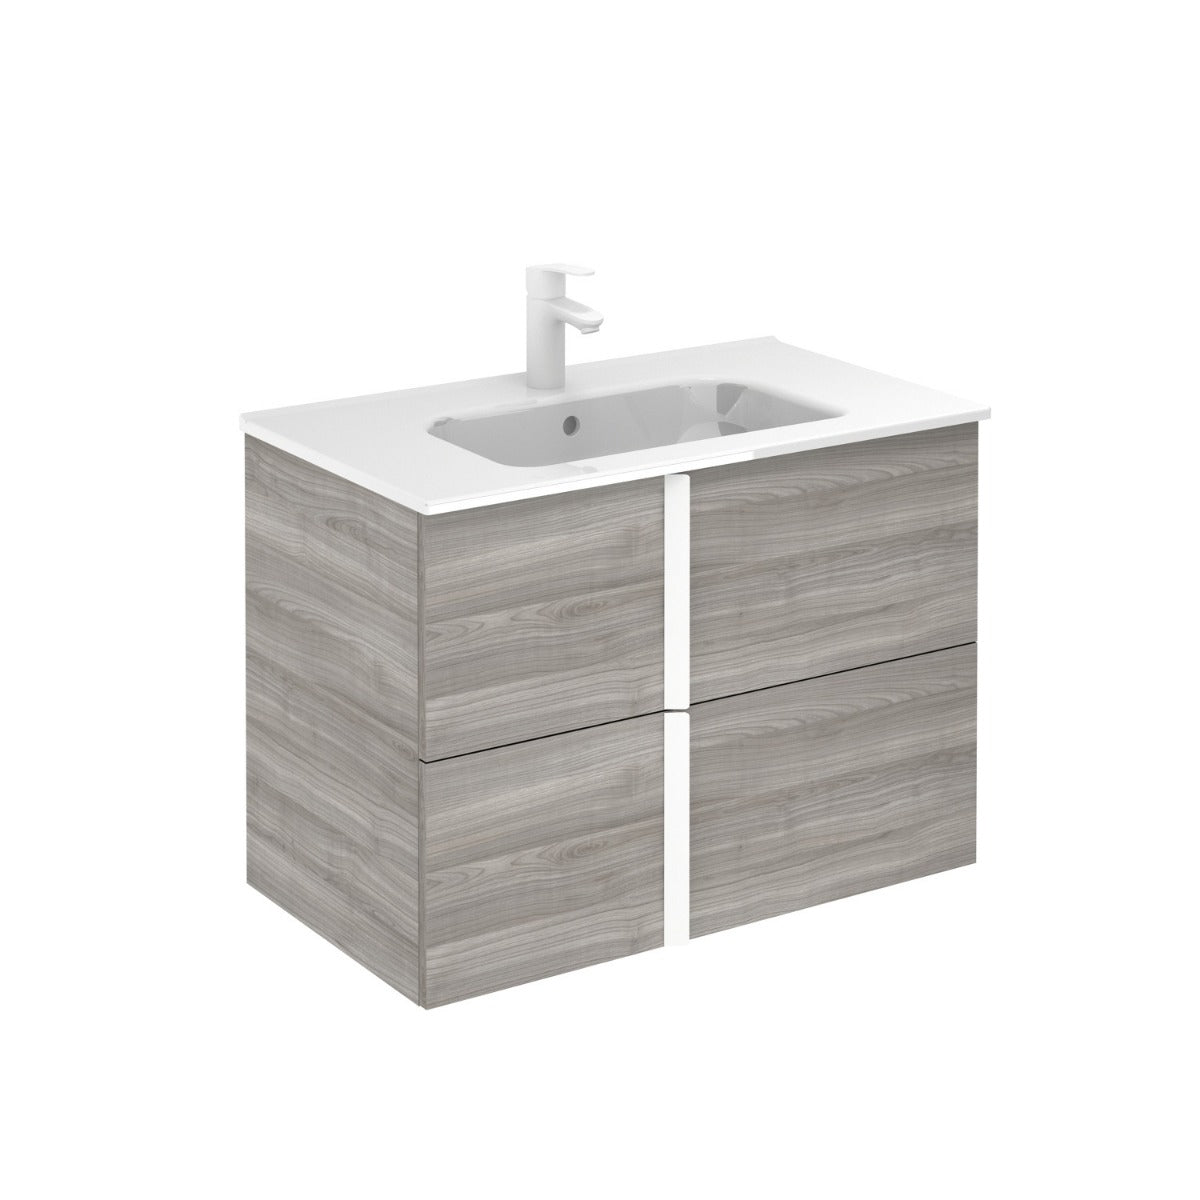 Frontline Sandy Grey Wall-Mounted Onix 2 Drawer Vanity Unit with White Handles (800mm) - Letta London - Wall Hung Vanity Units